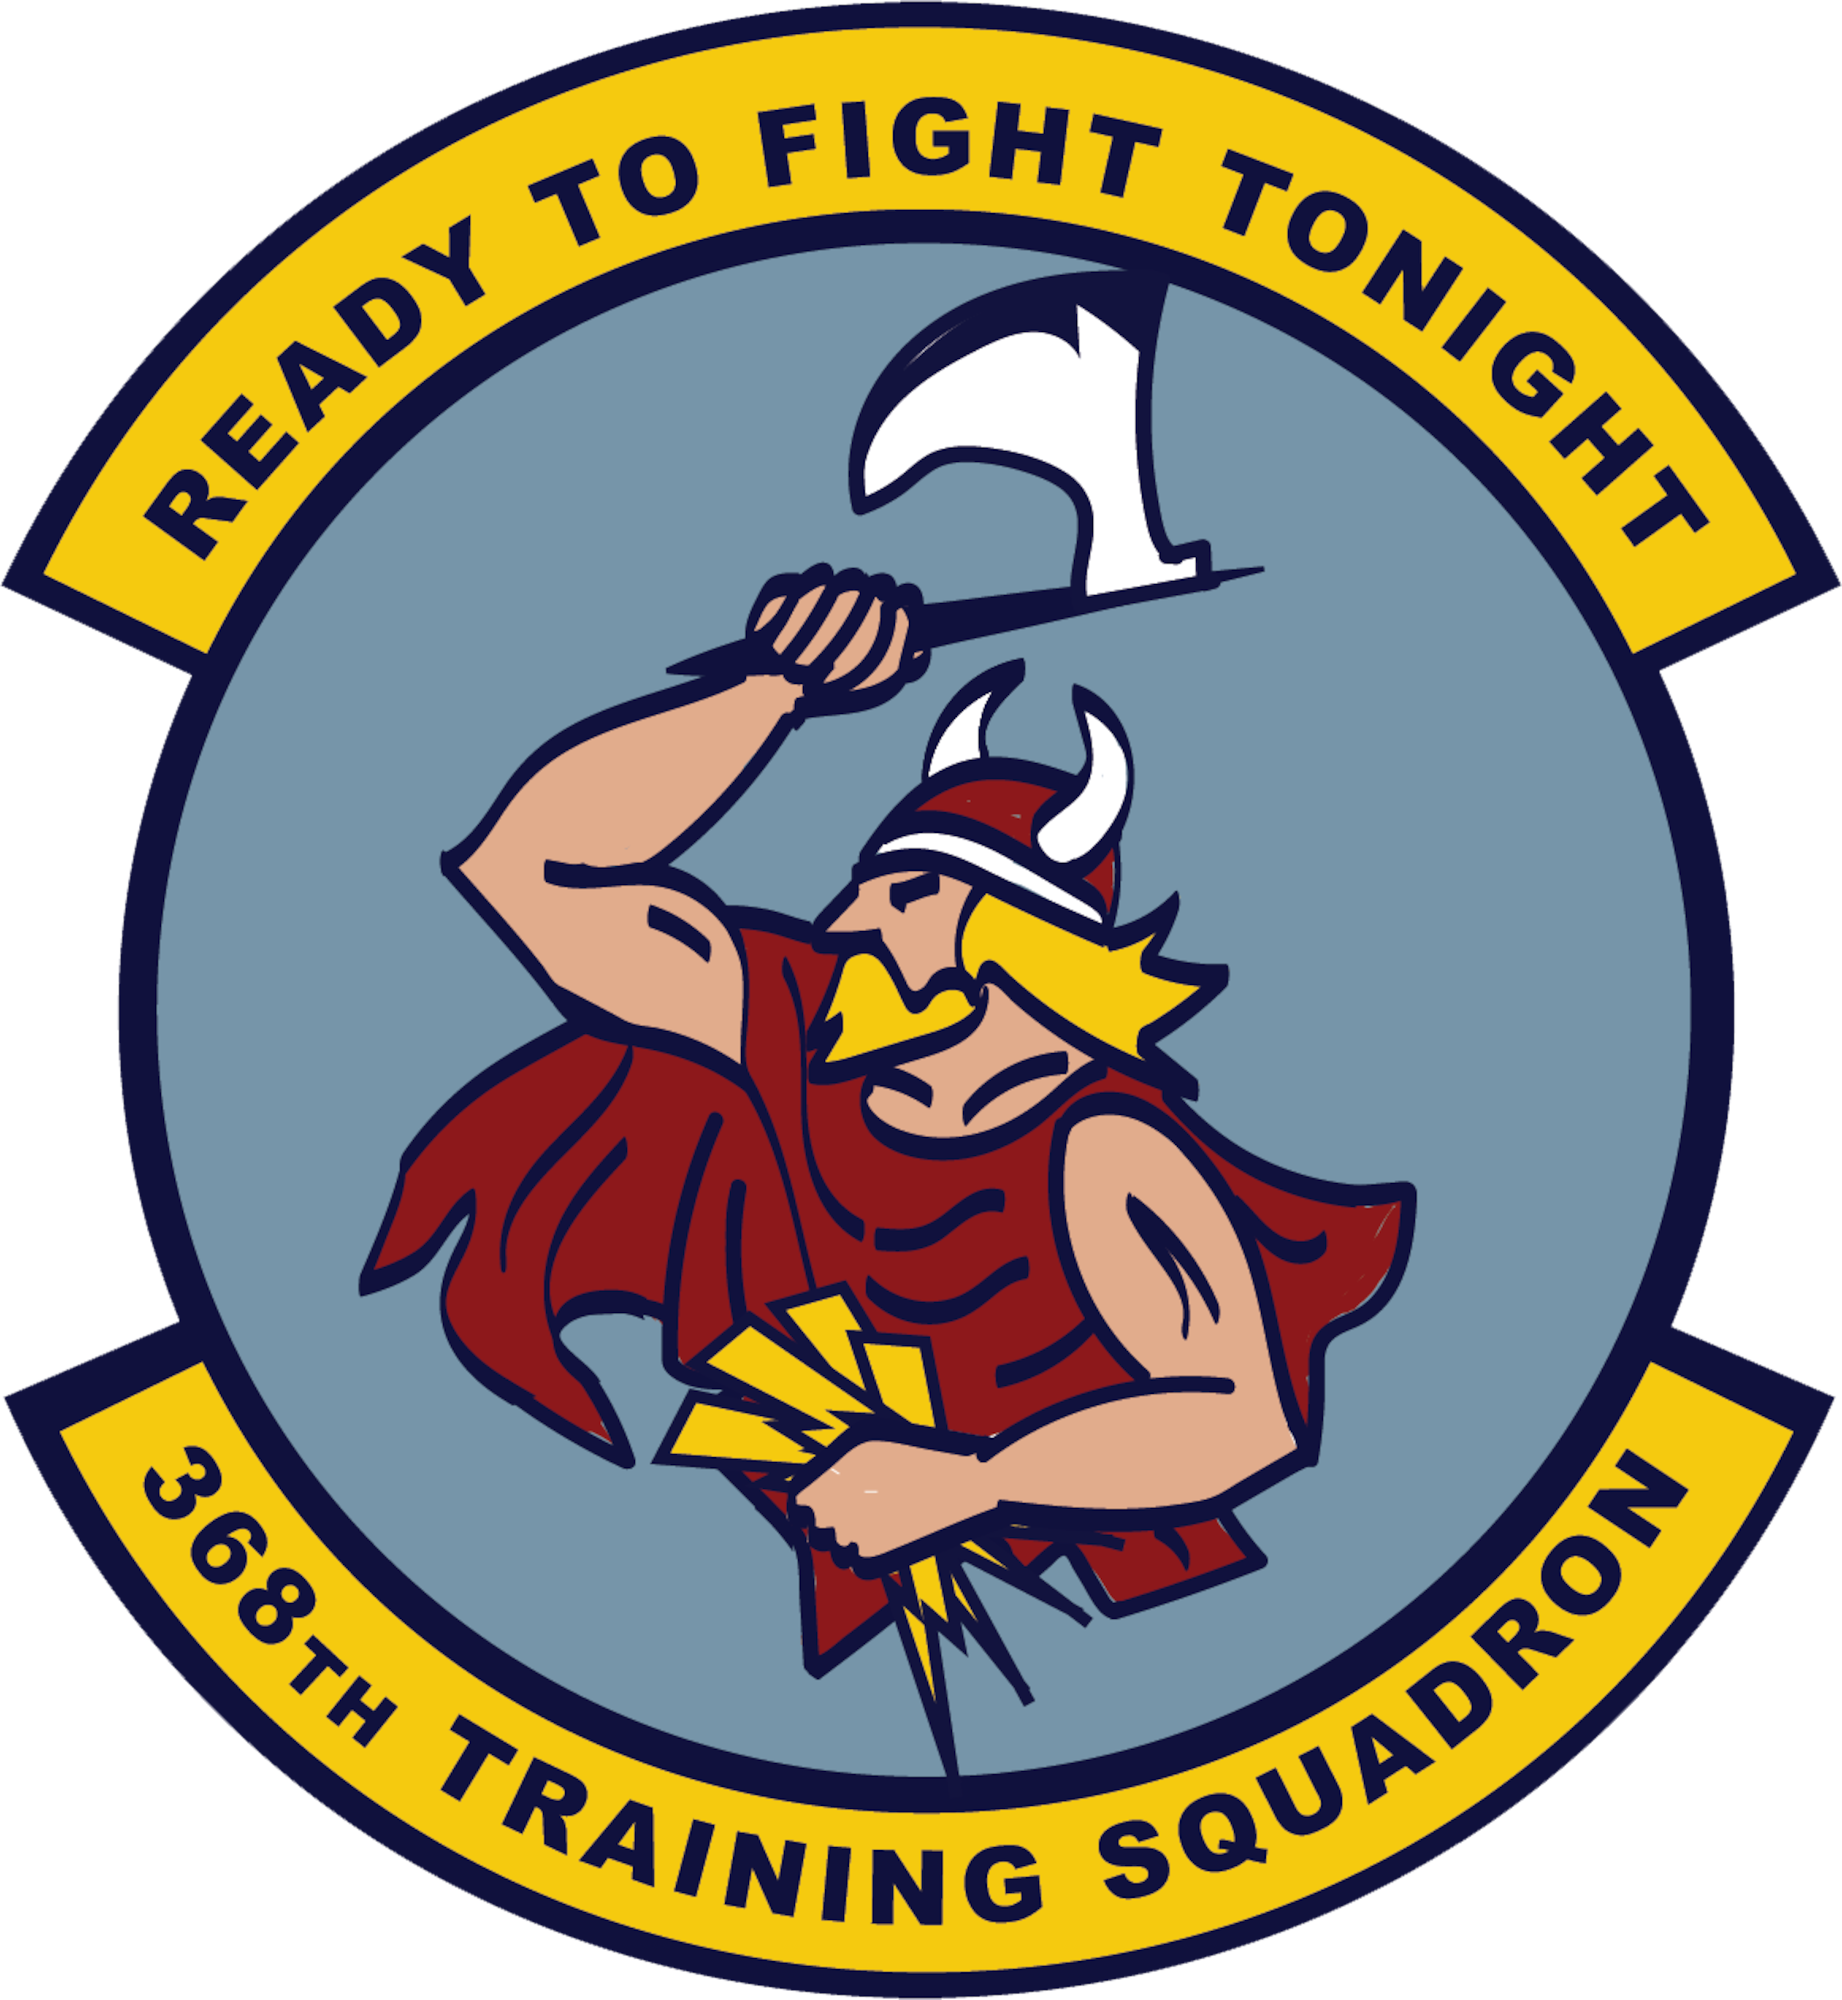 368th Training Squadron patch